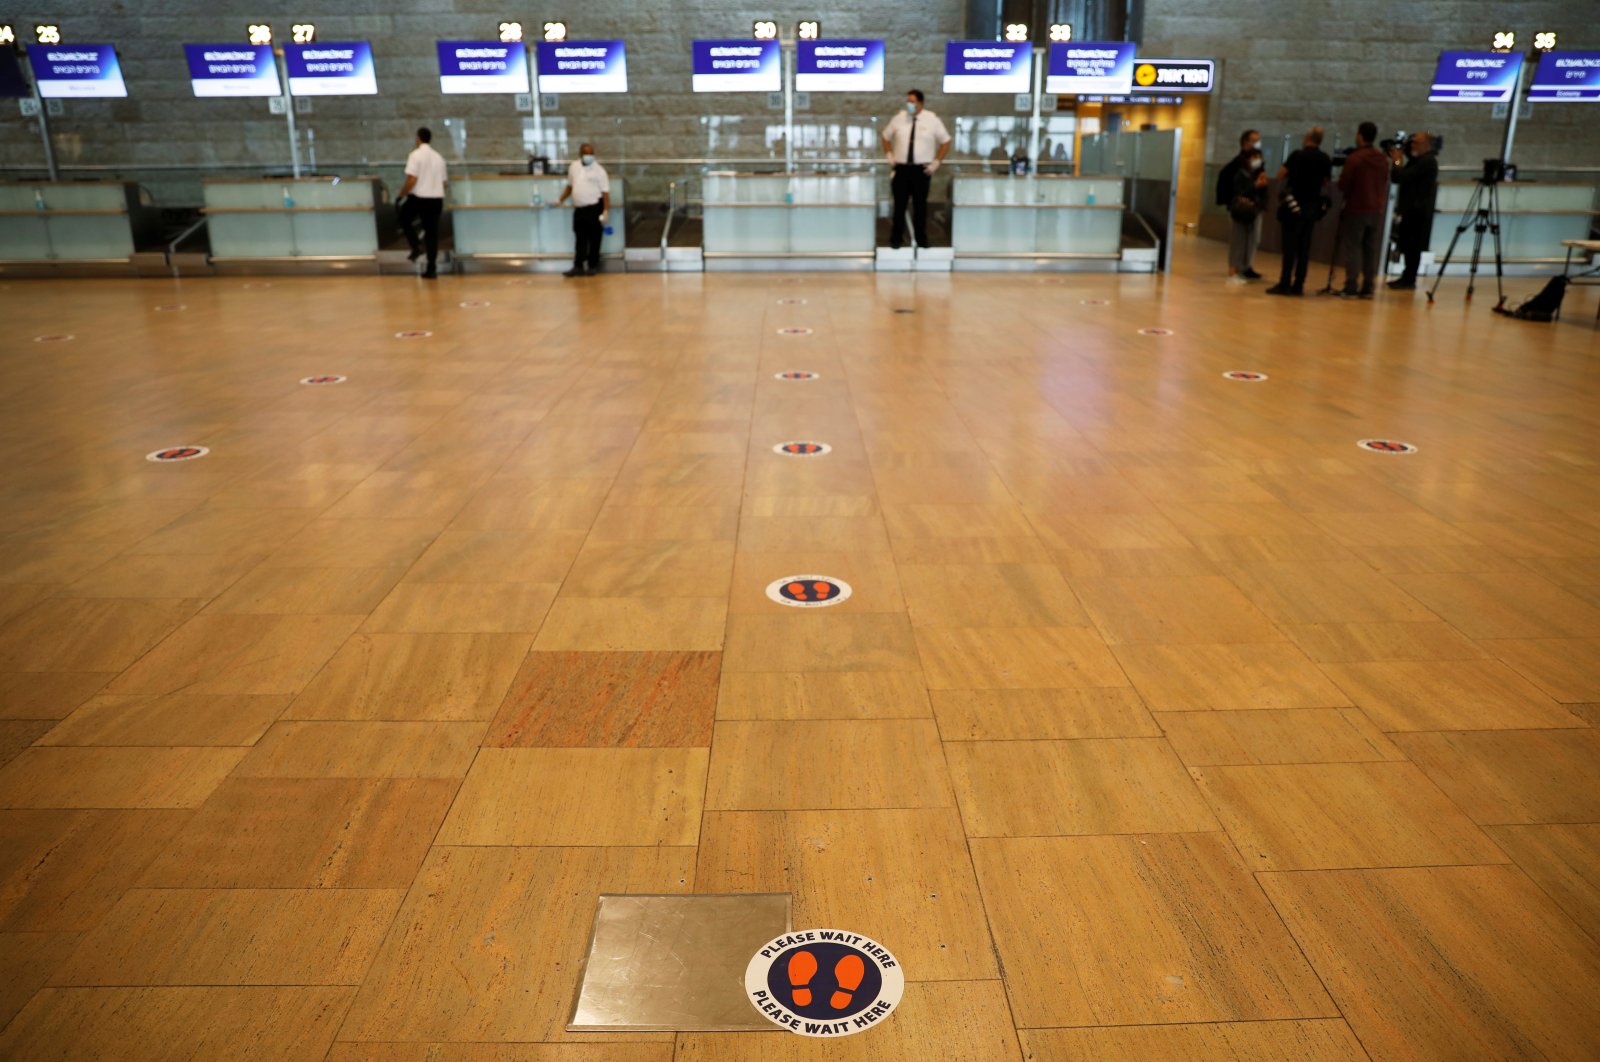 A social distancing marker is seen on the floor at the departures terminal at Ben Gurion Airport, in Lod, near Tel Aviv, Israel, May 14, 2020. (Reuters Photo)